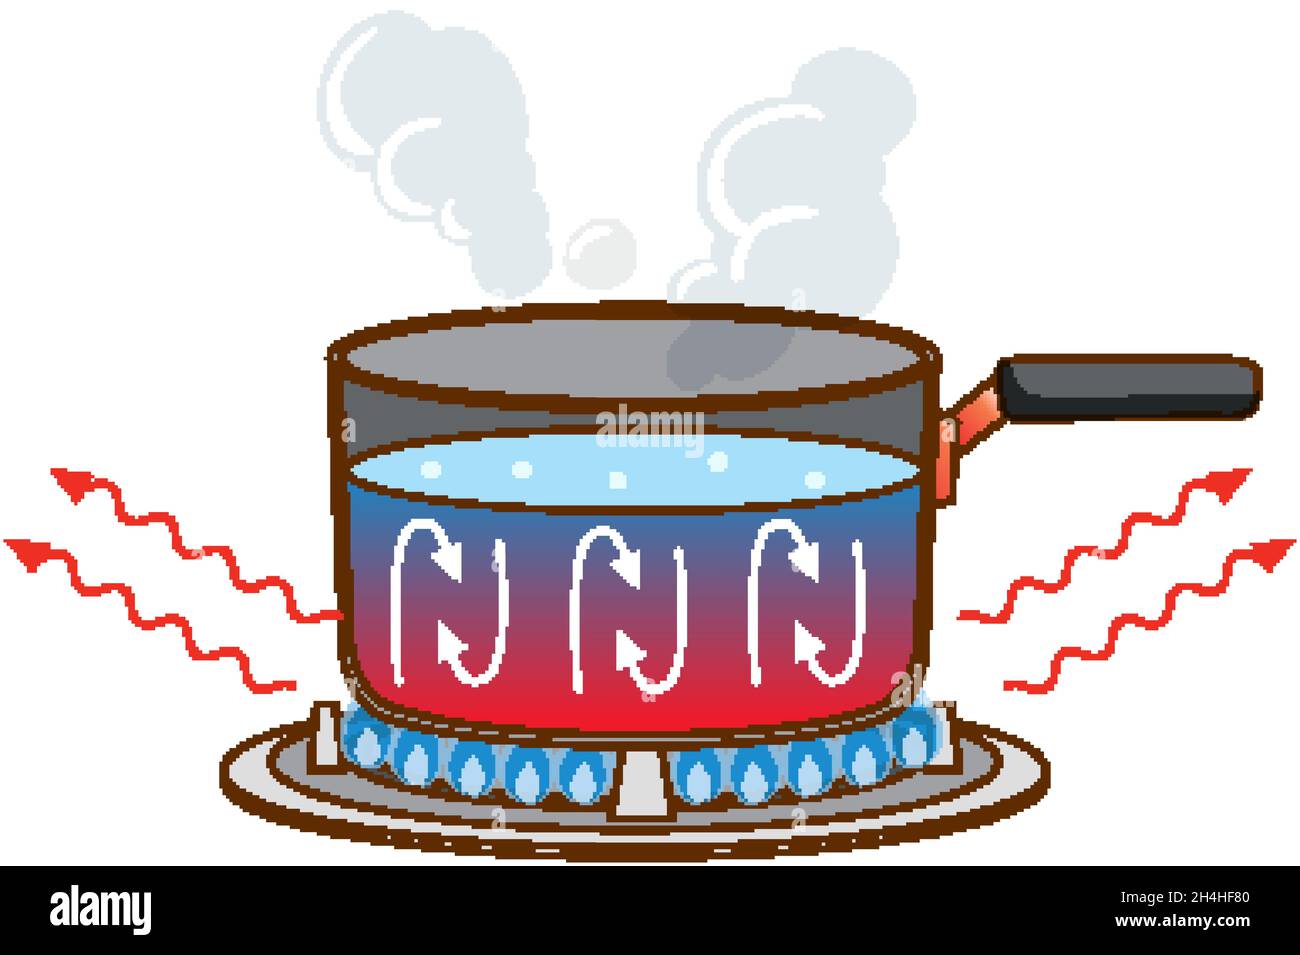 https://c8.alamy.com/comp/2H4HF80/handle-pot-with-boiling-water-on-gas-stove-illustration-2H4HF80.jpg